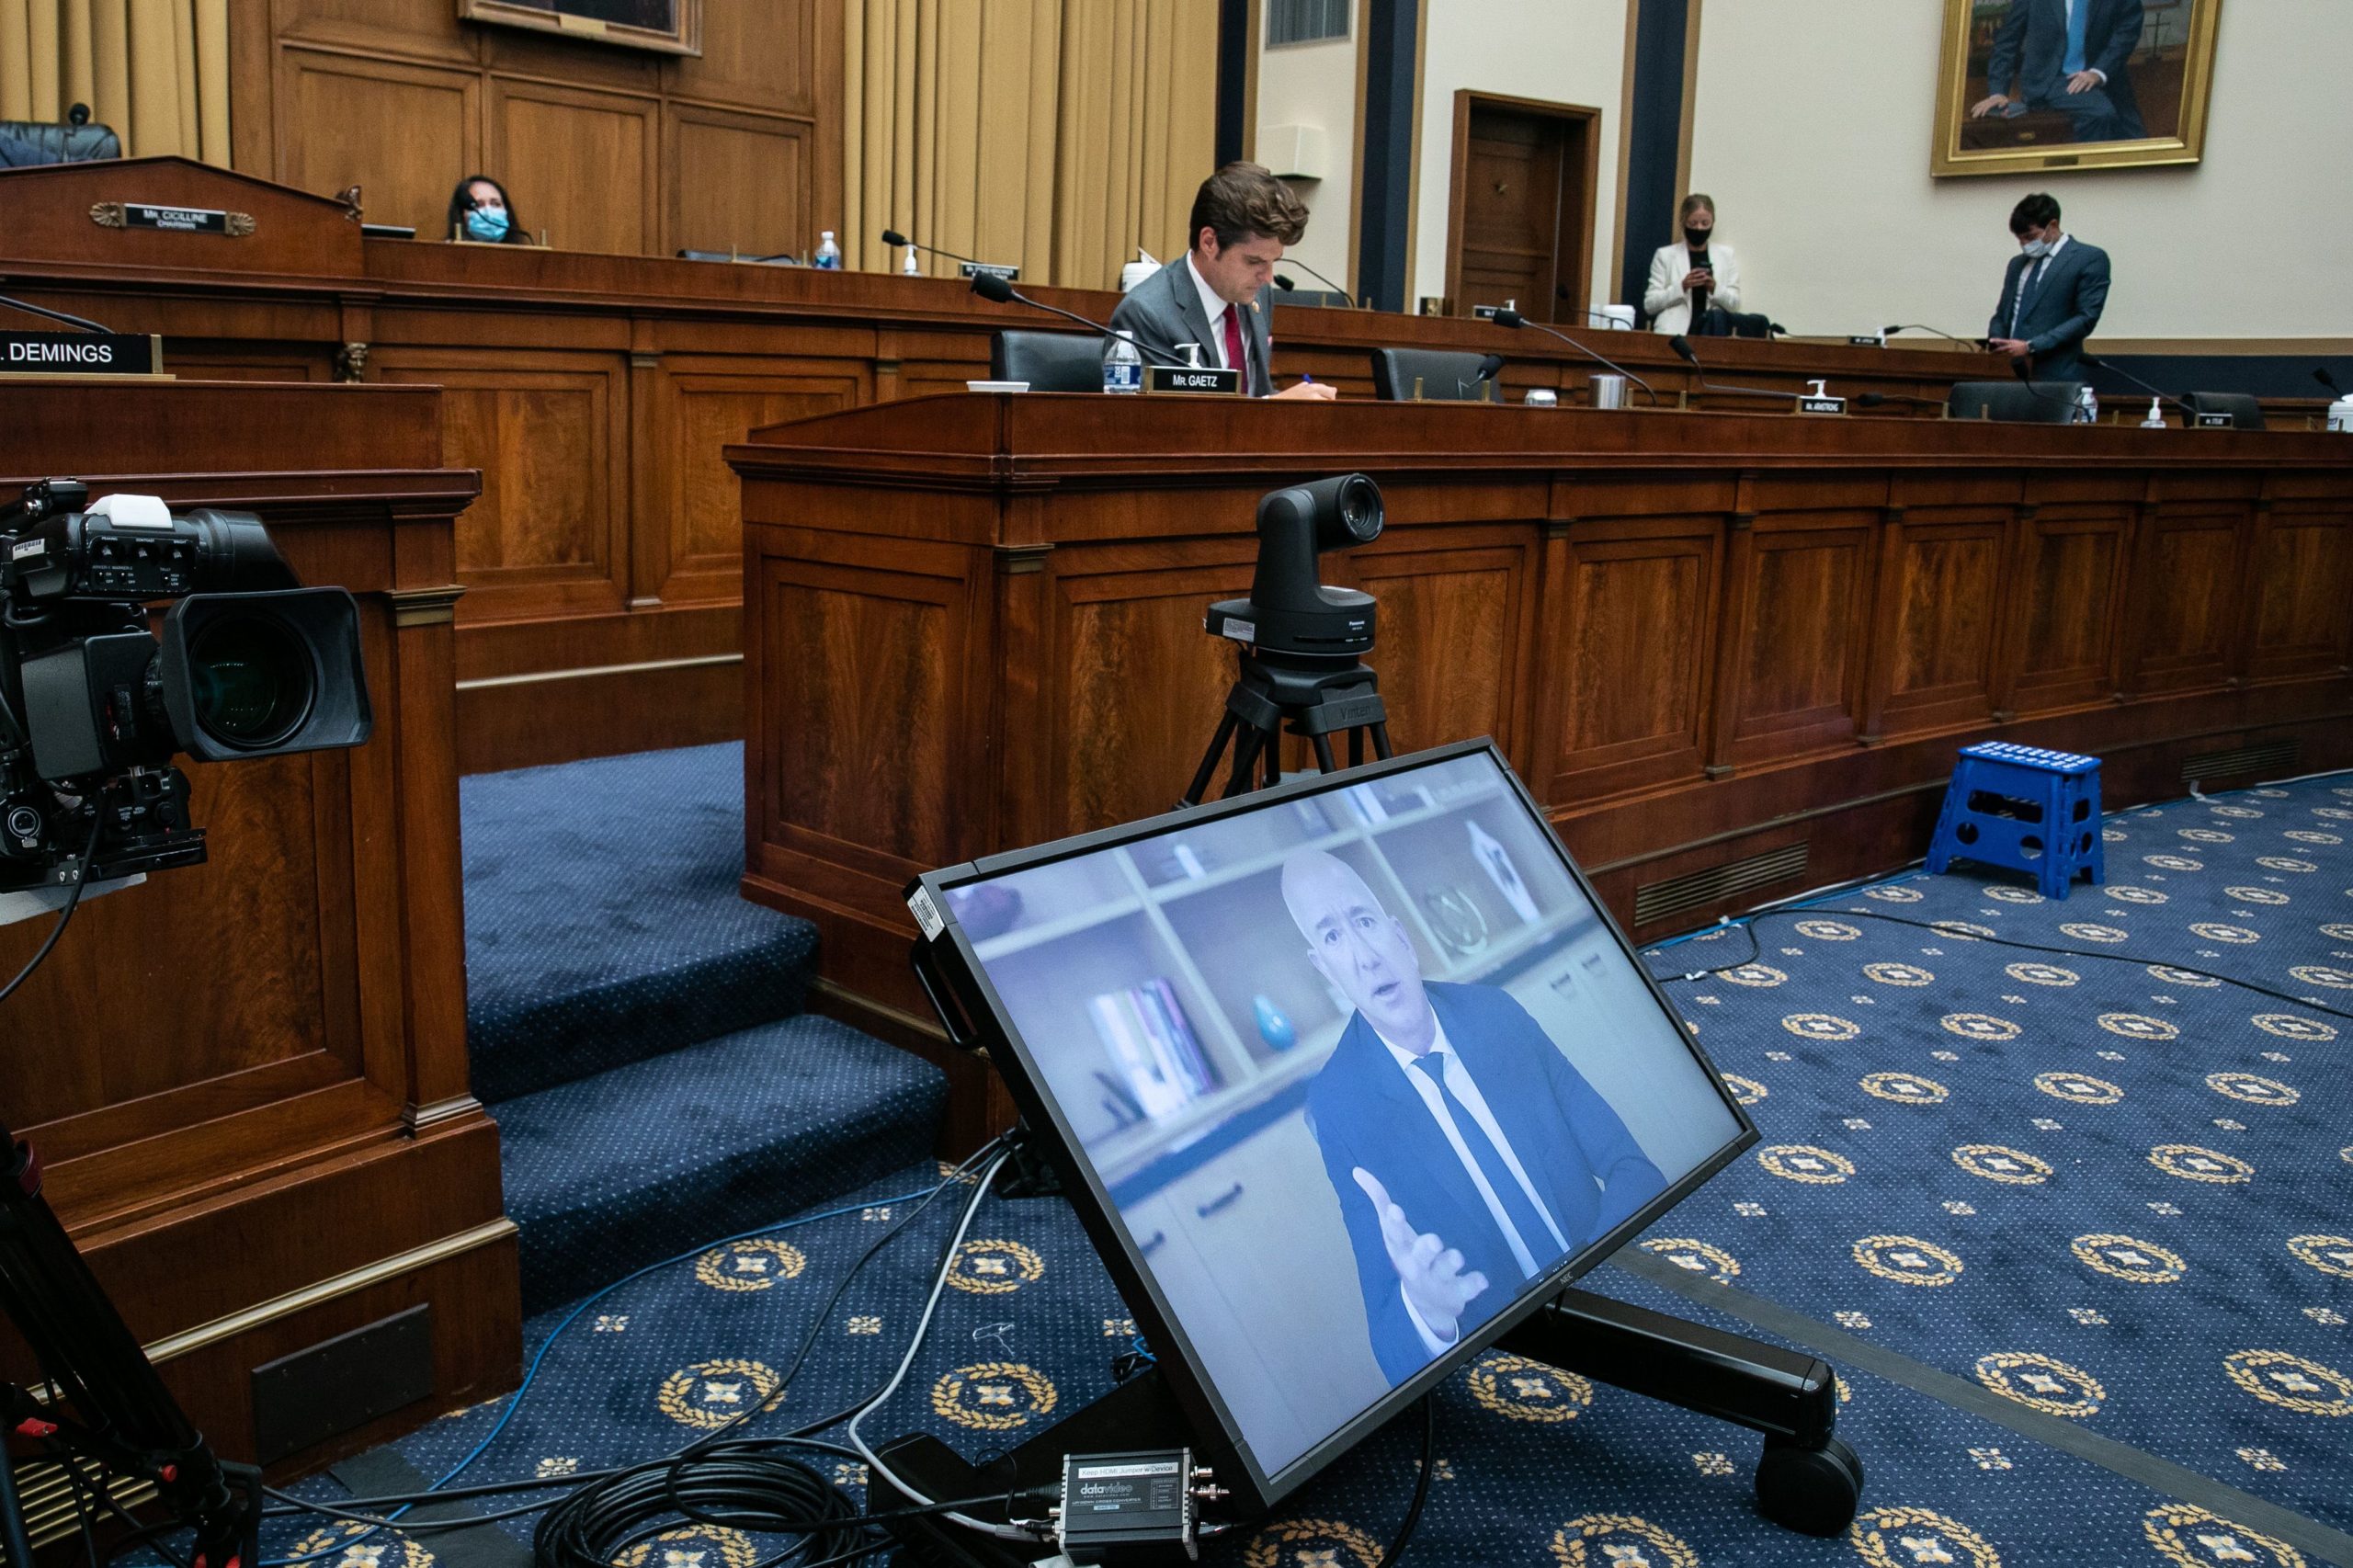 Amazon CEO Jeff Bezos testifies before the House Judiciary Antitrust Subcommittee on July 29, 2020. (Graeme Jennings/Pool/AFP via Getty Images)